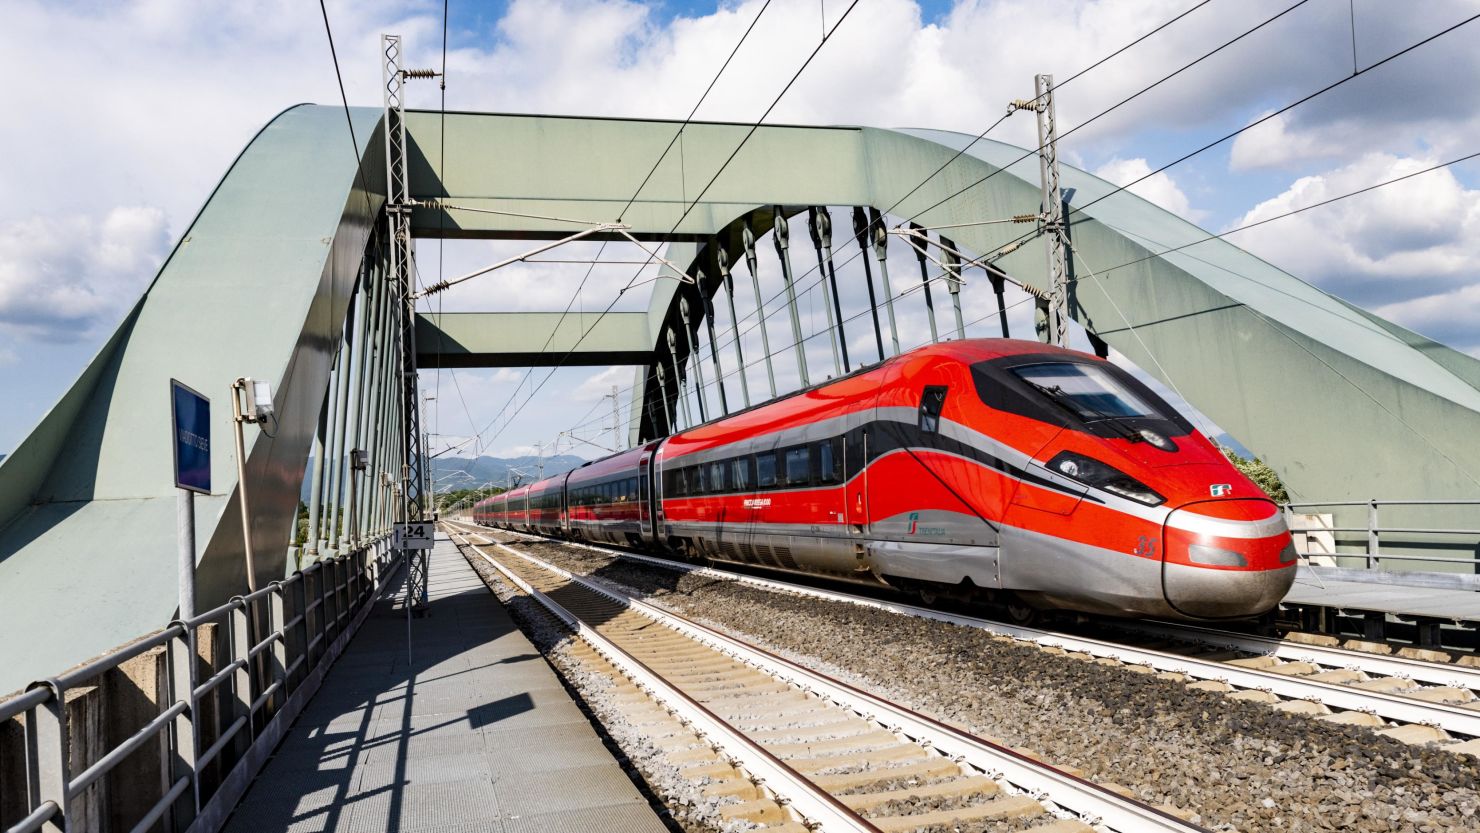 The 'covid-free' trains will launch on the Rome to Milan high-speed route.